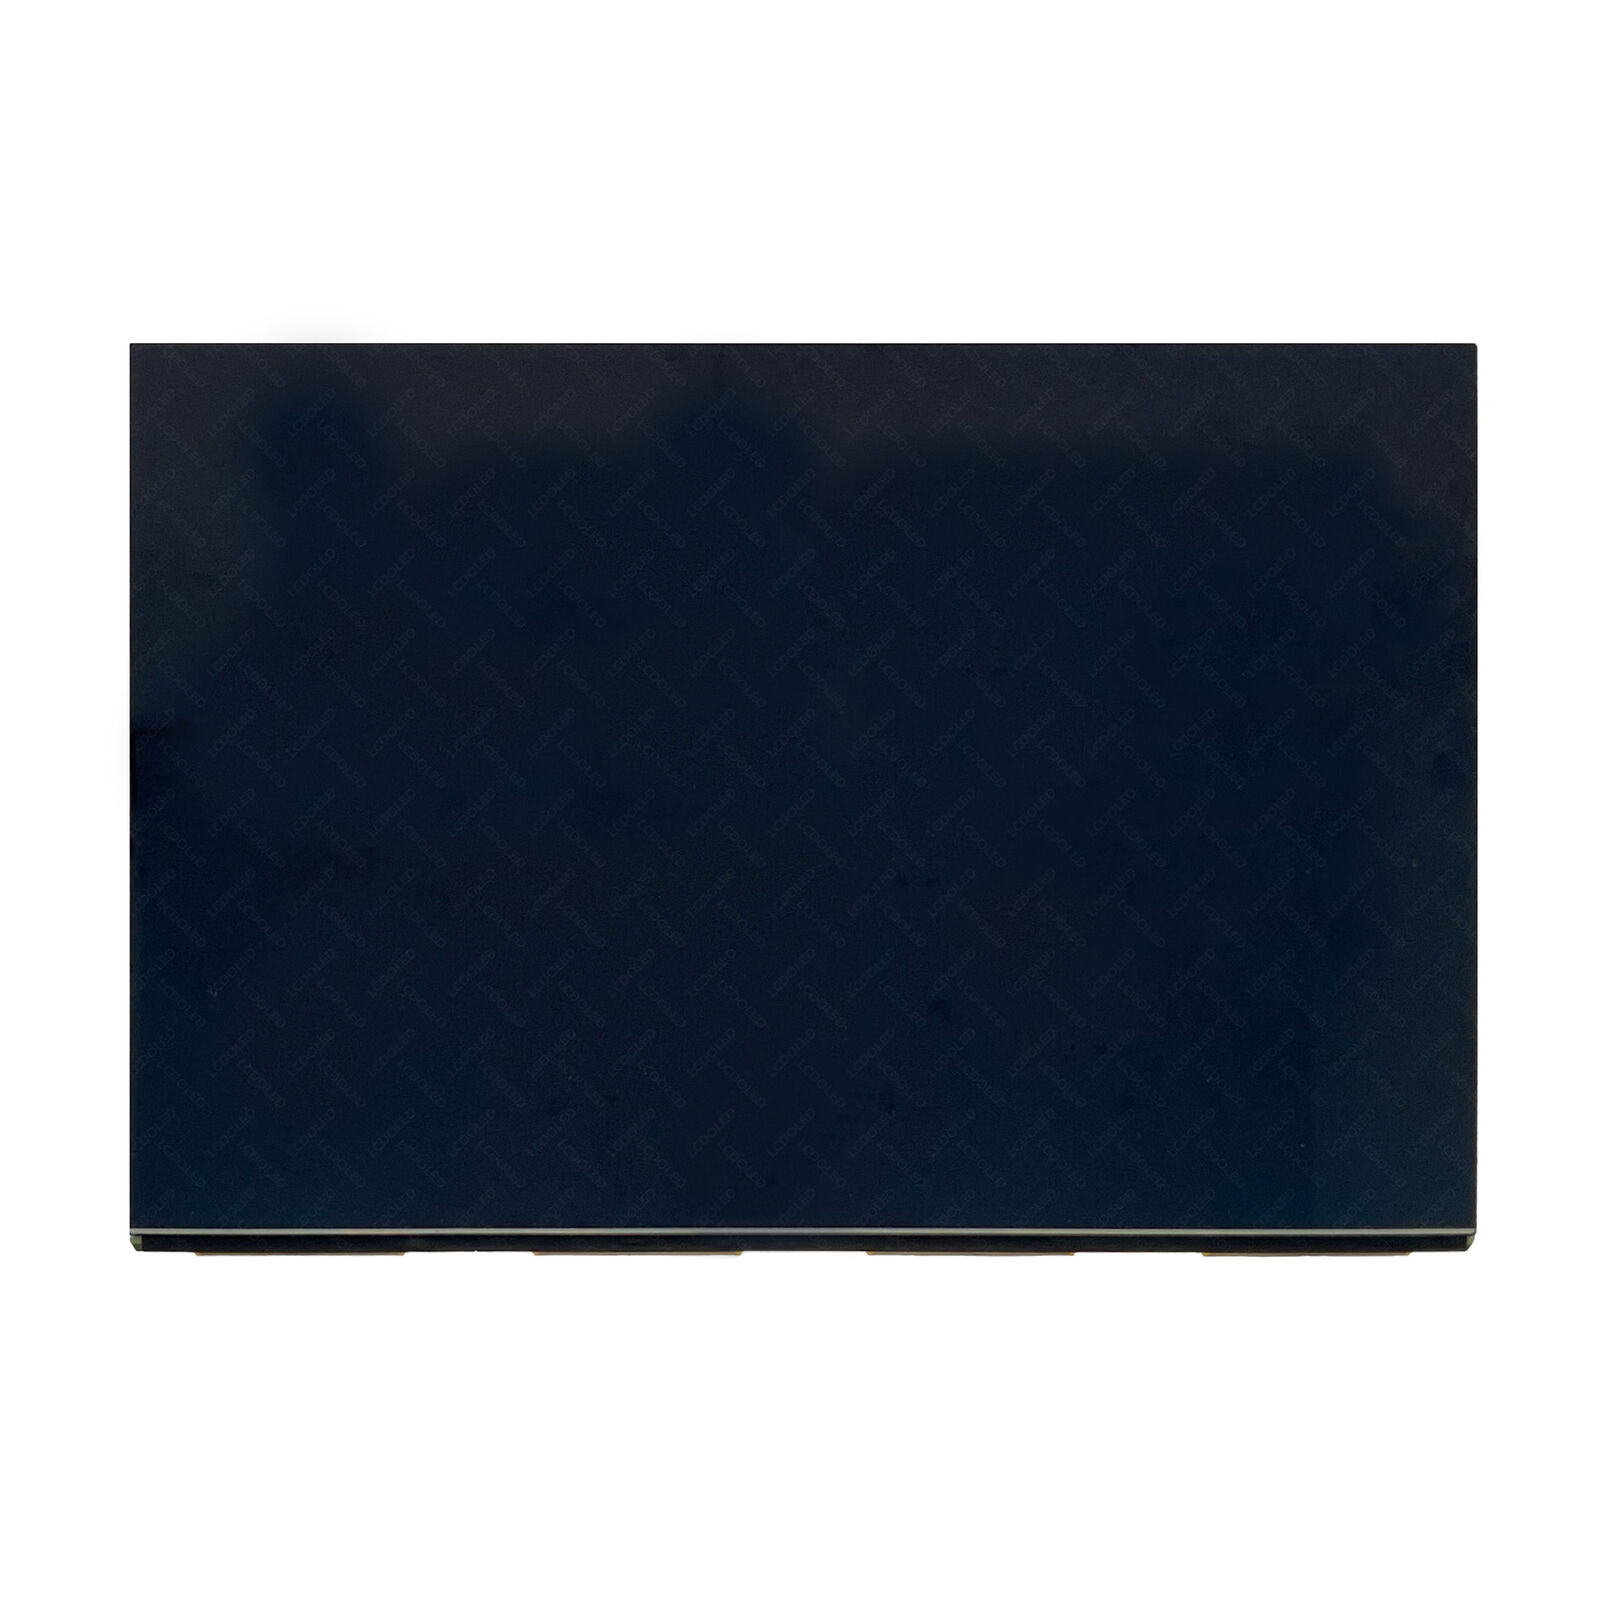 2.8K OLED IPS Display LCD Screen for Lenovo ThinkPad X1 Carbon Gen 10 nontouch